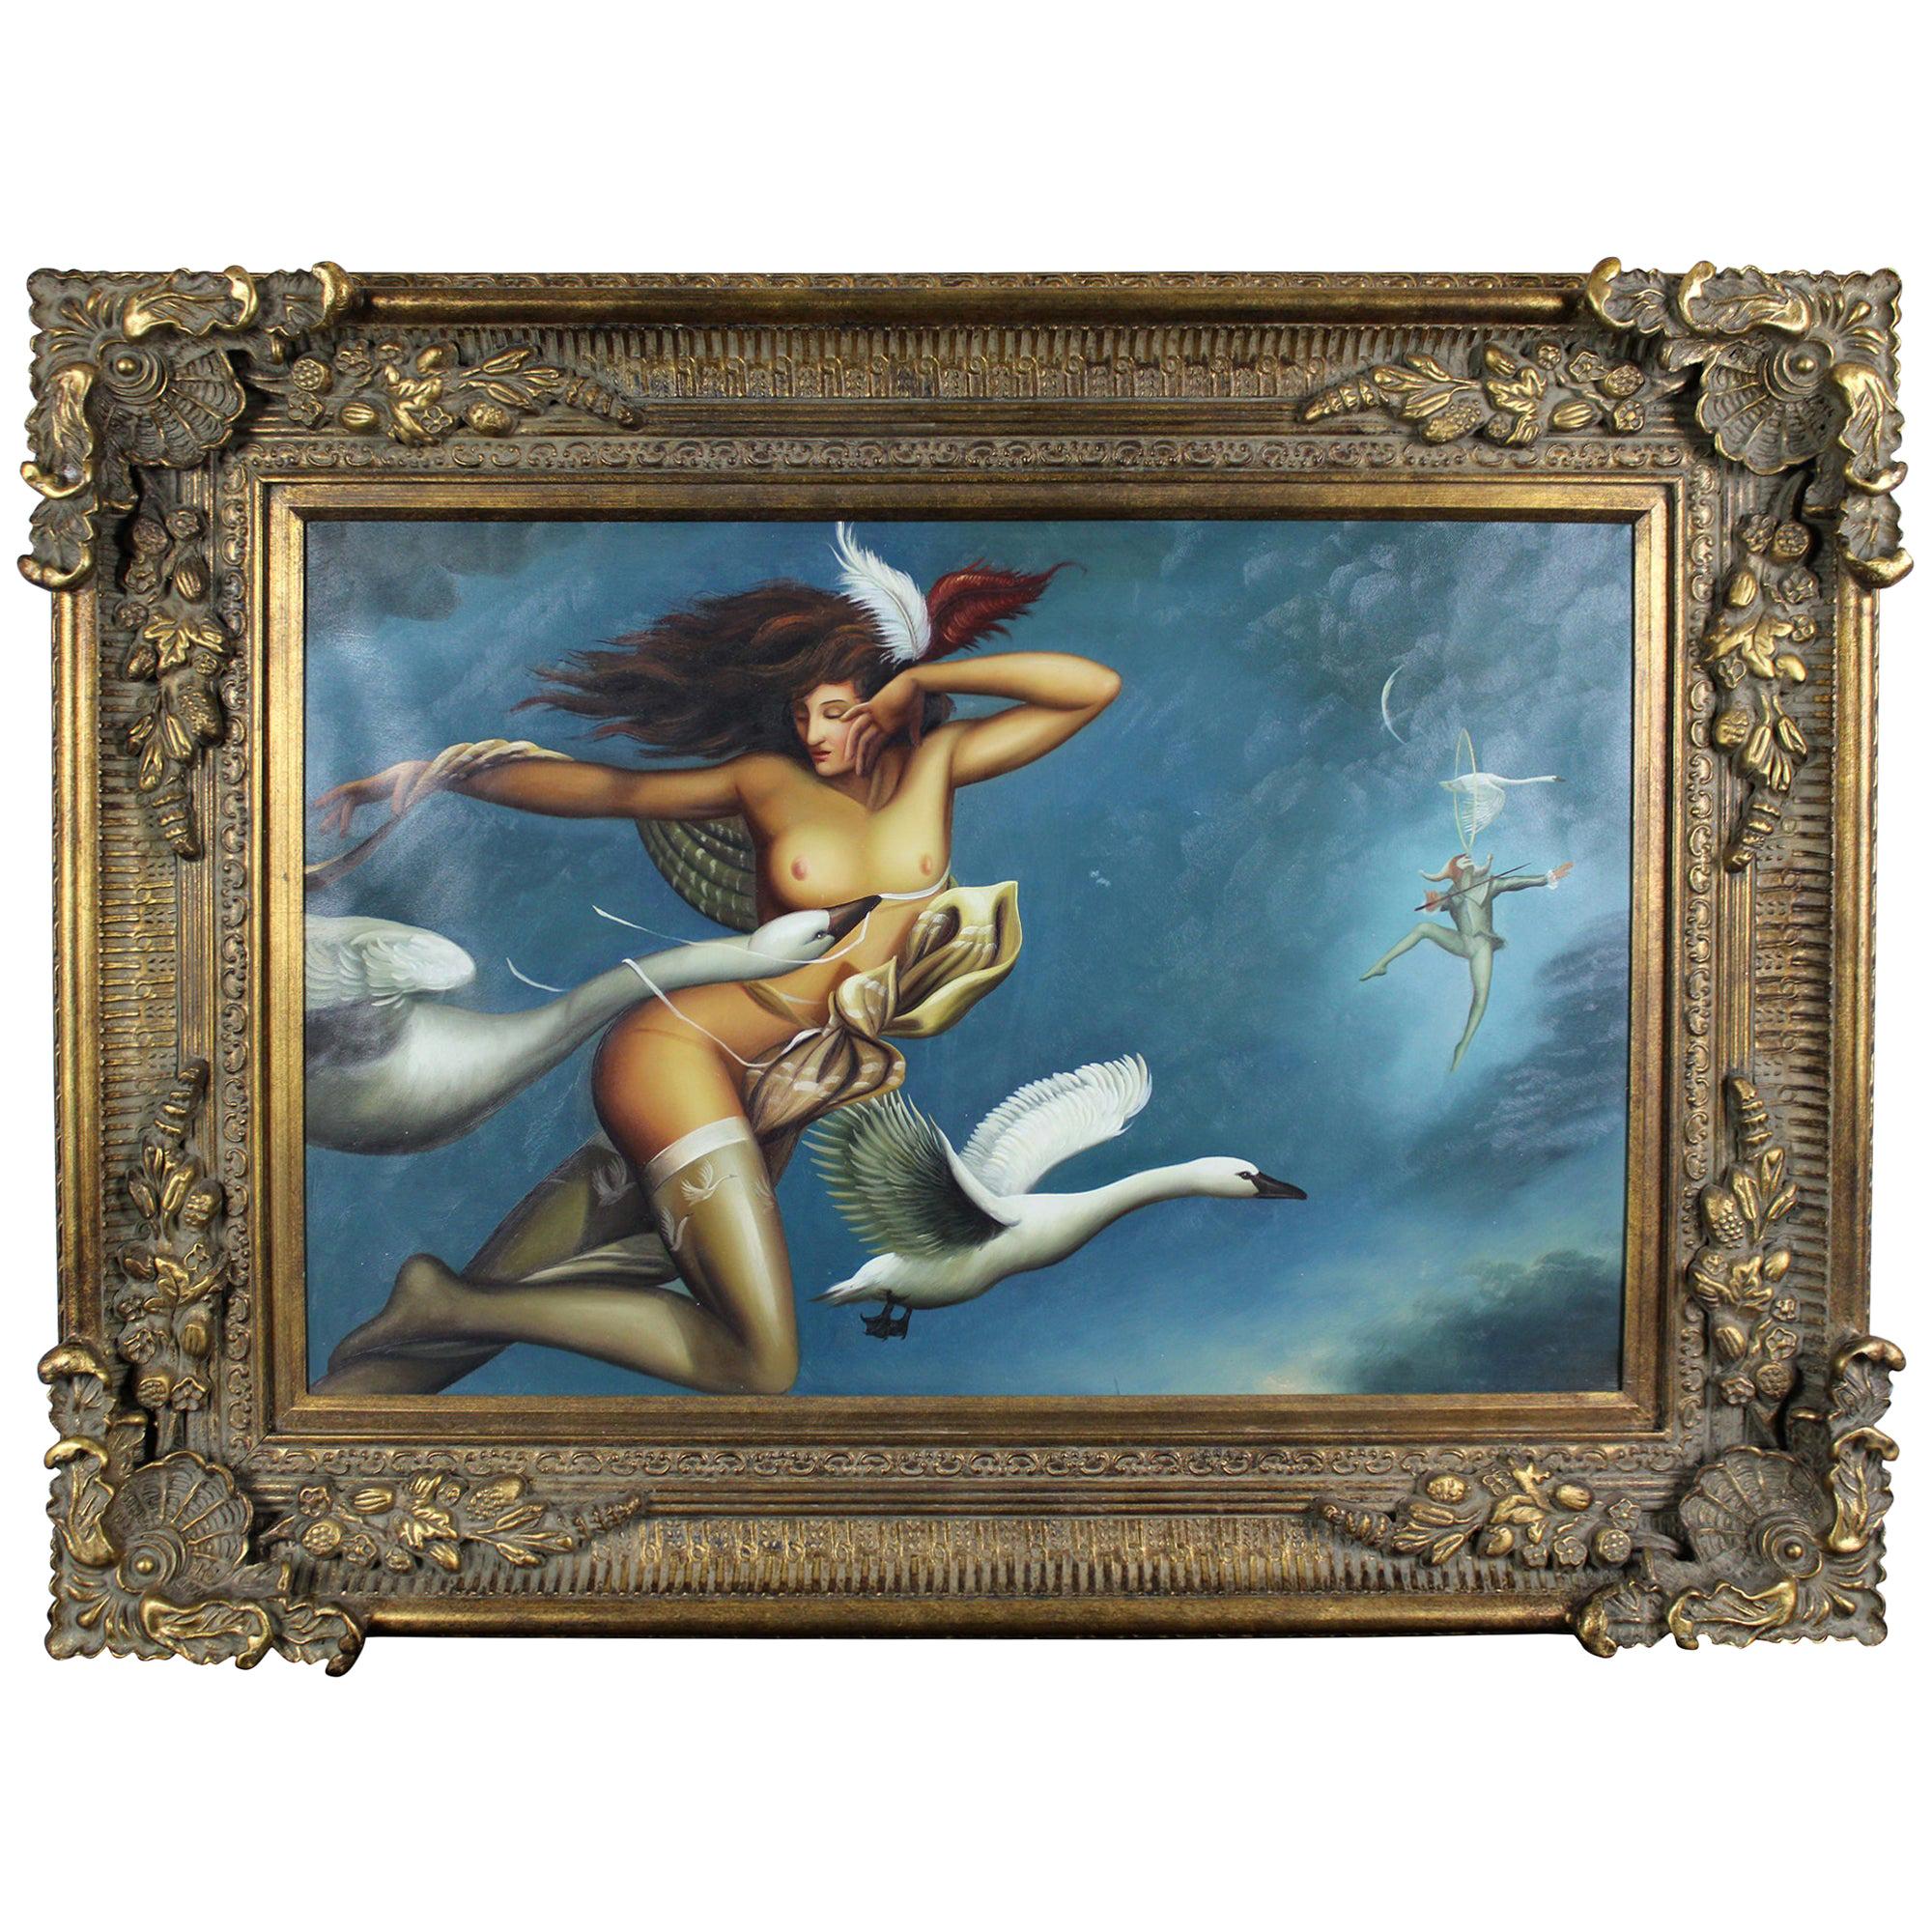 Michael Parkes "Night Flight" Limited Edition Giclee on Canvas Nude Swans For Sale